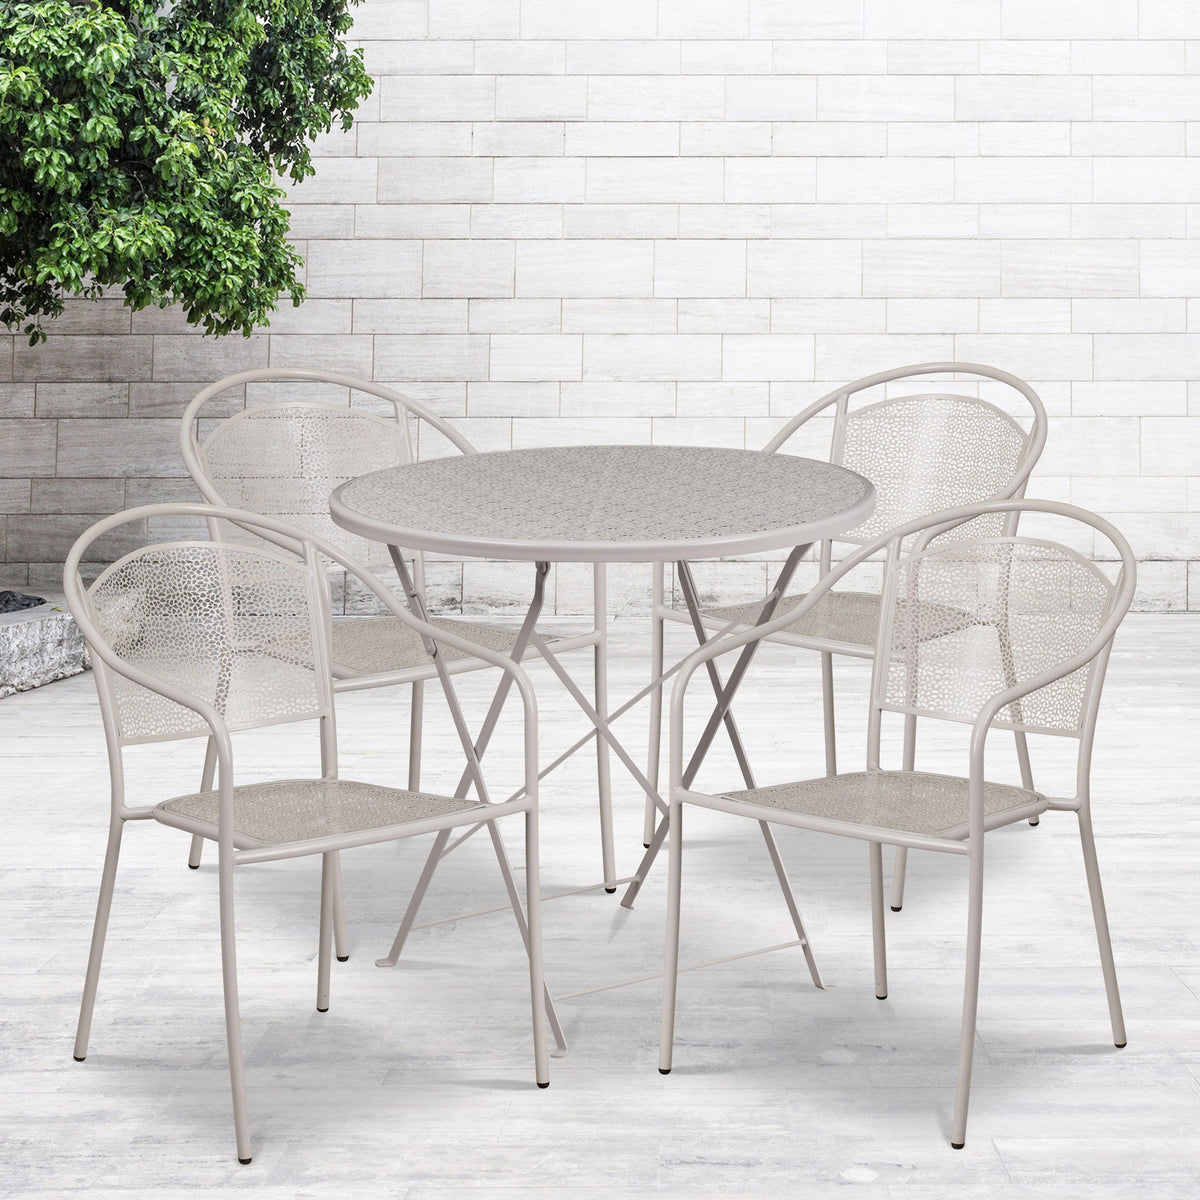 Light Gray |#| 30inch Round Light Gray Indoor-Outdoor Steel Folding Patio Table Set with 4 Chairs